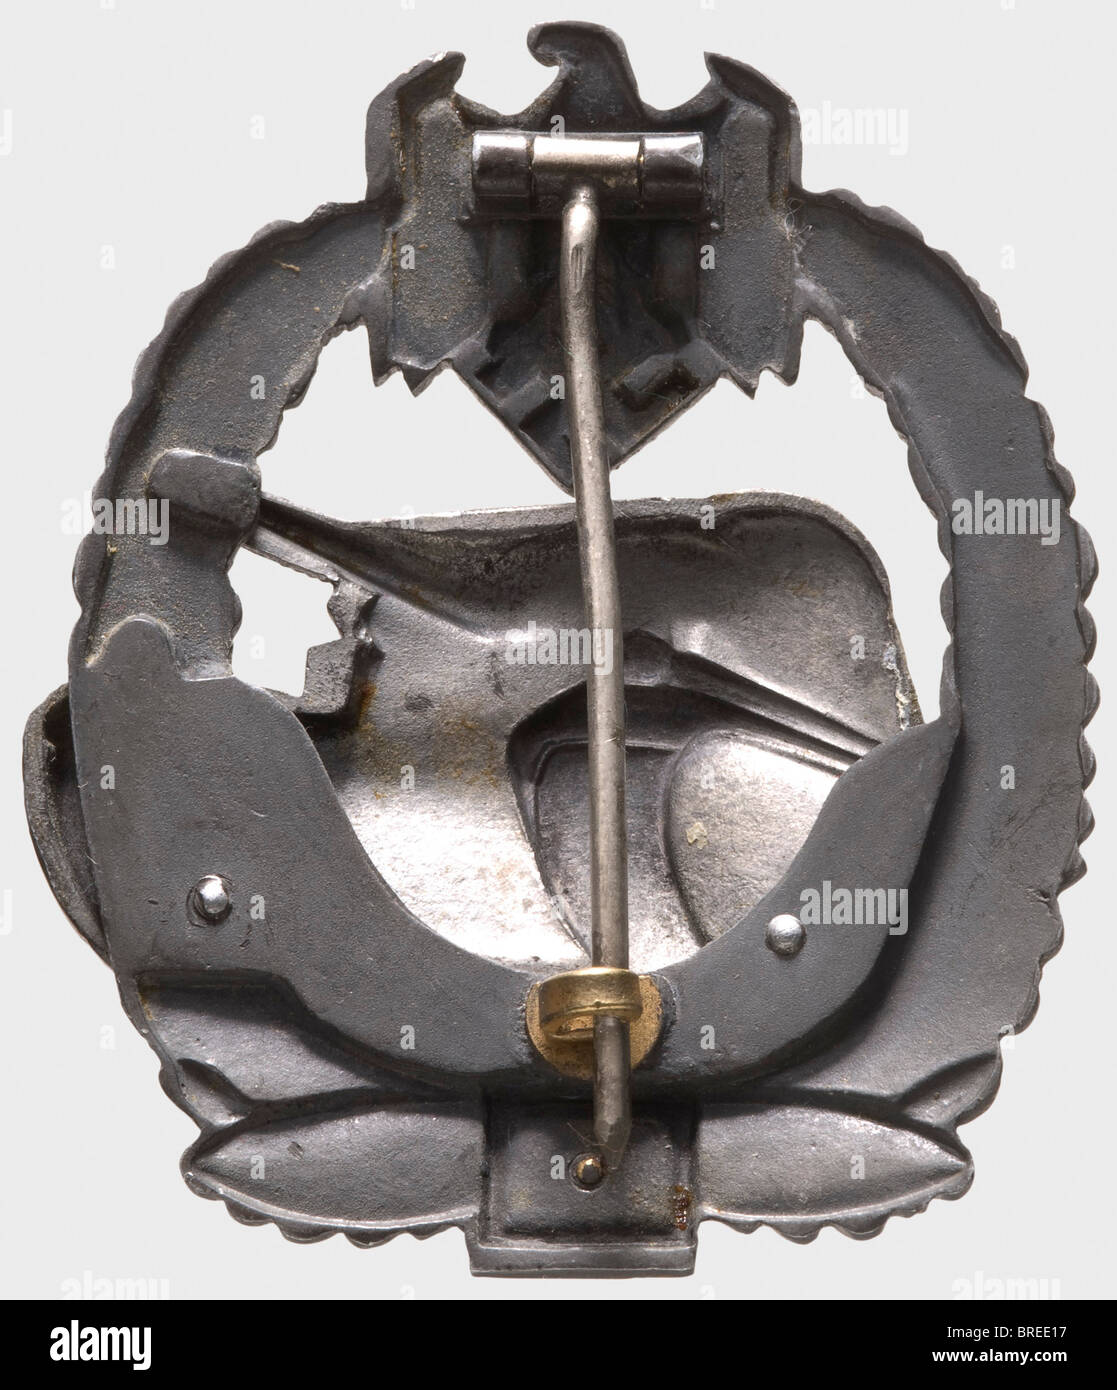 An Army Tank Assault Badge in Silver, Grade IV for 75 engagements Two-piece version of fine zinc with riveted zinc tank and separately inset engagements number. Wire pin. The gilding of the oak leaf wreath is completely migrated. Weight 31.40 g (OEK 3898). historic, historical, 1930s, 1930s, 20th century, awards, award, German Reich, Third Reich, Nazi era, National Socialism, object, objects, stills, medal, decoration, medals, decorations, clipping, cut out, cut-out, cut-outs, honor, honour, National Socialist, Nazi, Nazi period, symbol, symbols, emblem, emblem, Stock Photo